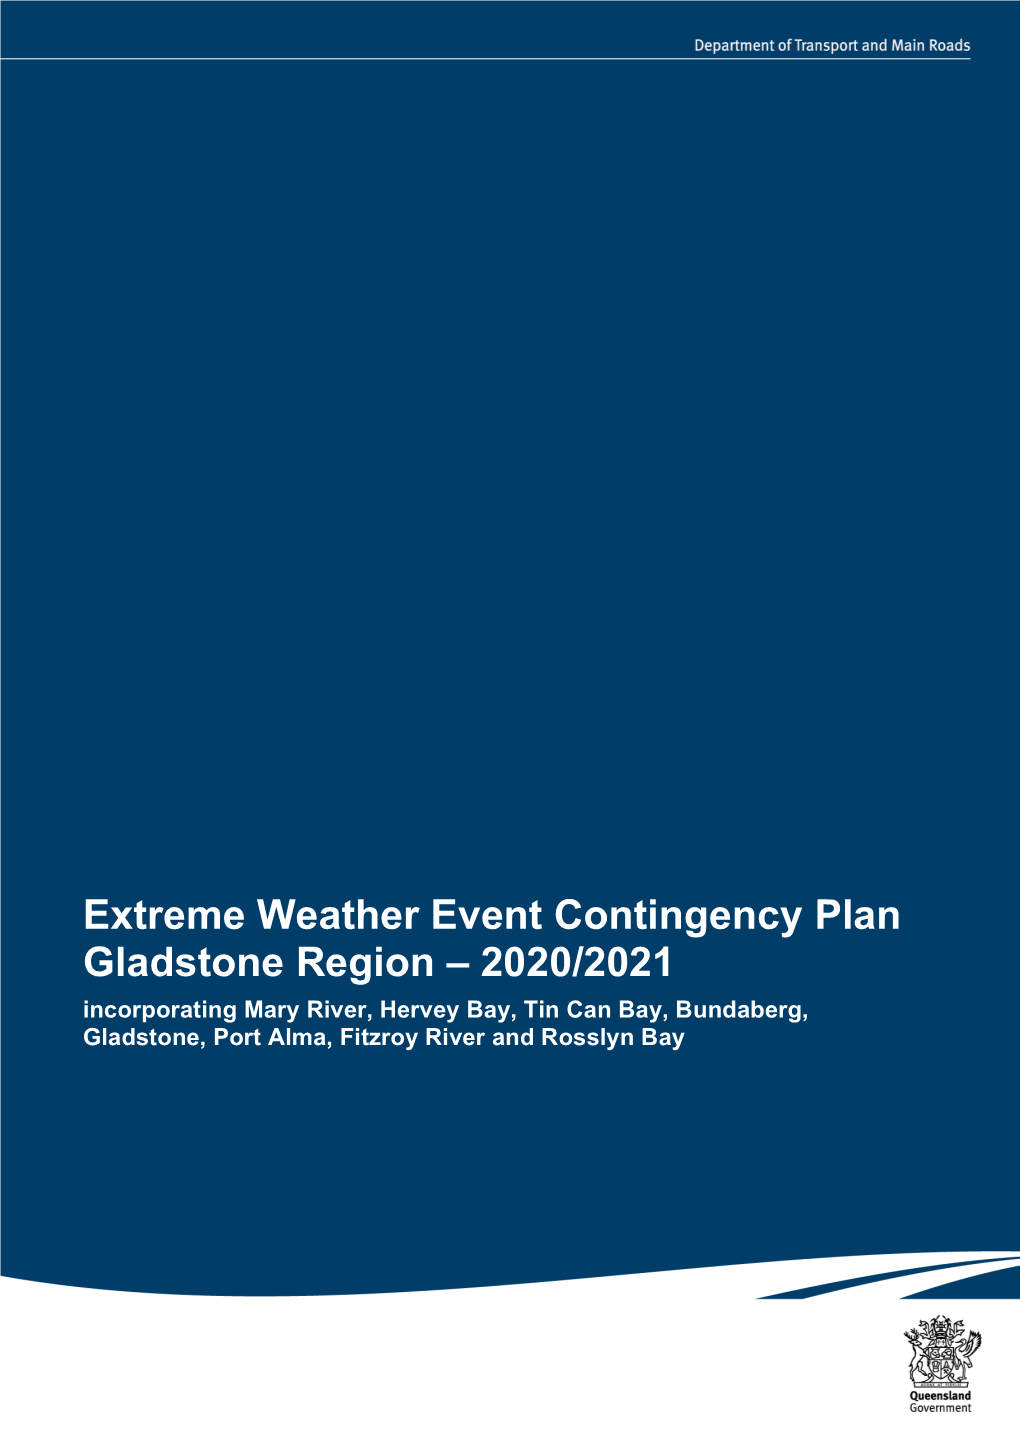 Extreme Weather Event Contingency Plan Gladstone Region – 2020/2021